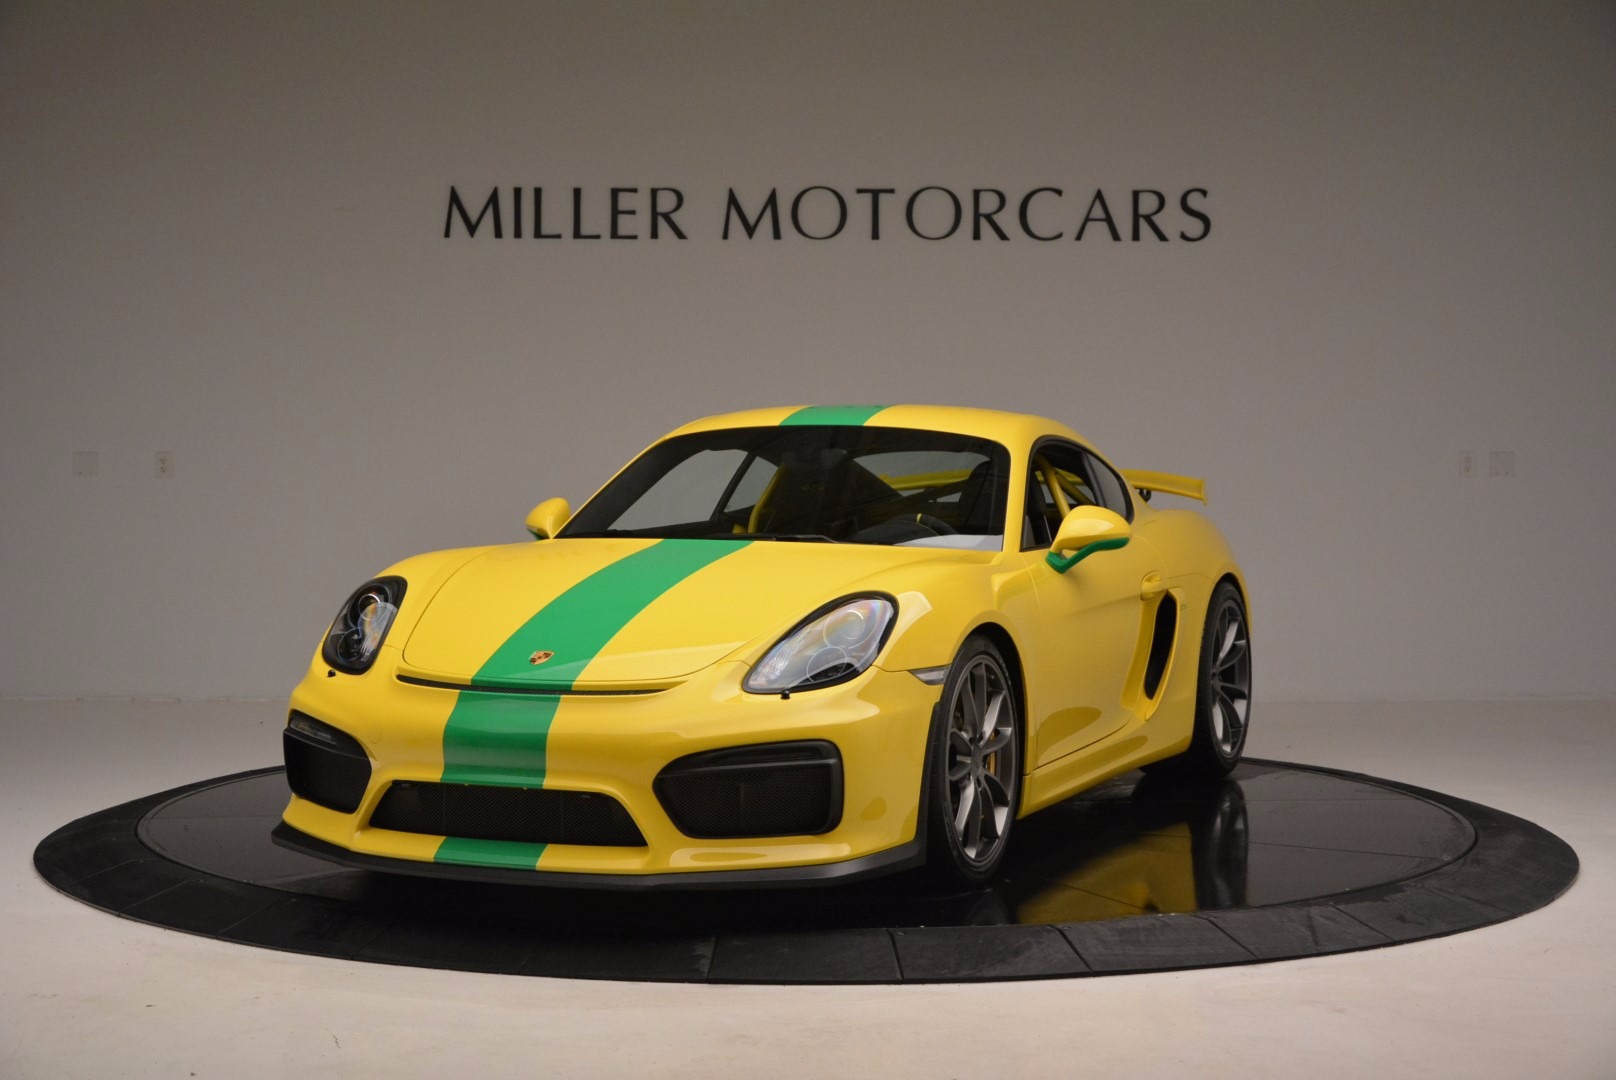 Used 2016 Porsche Cayman GT4 for sale Sold at Aston Martin of Greenwich in Greenwich CT 06830 1